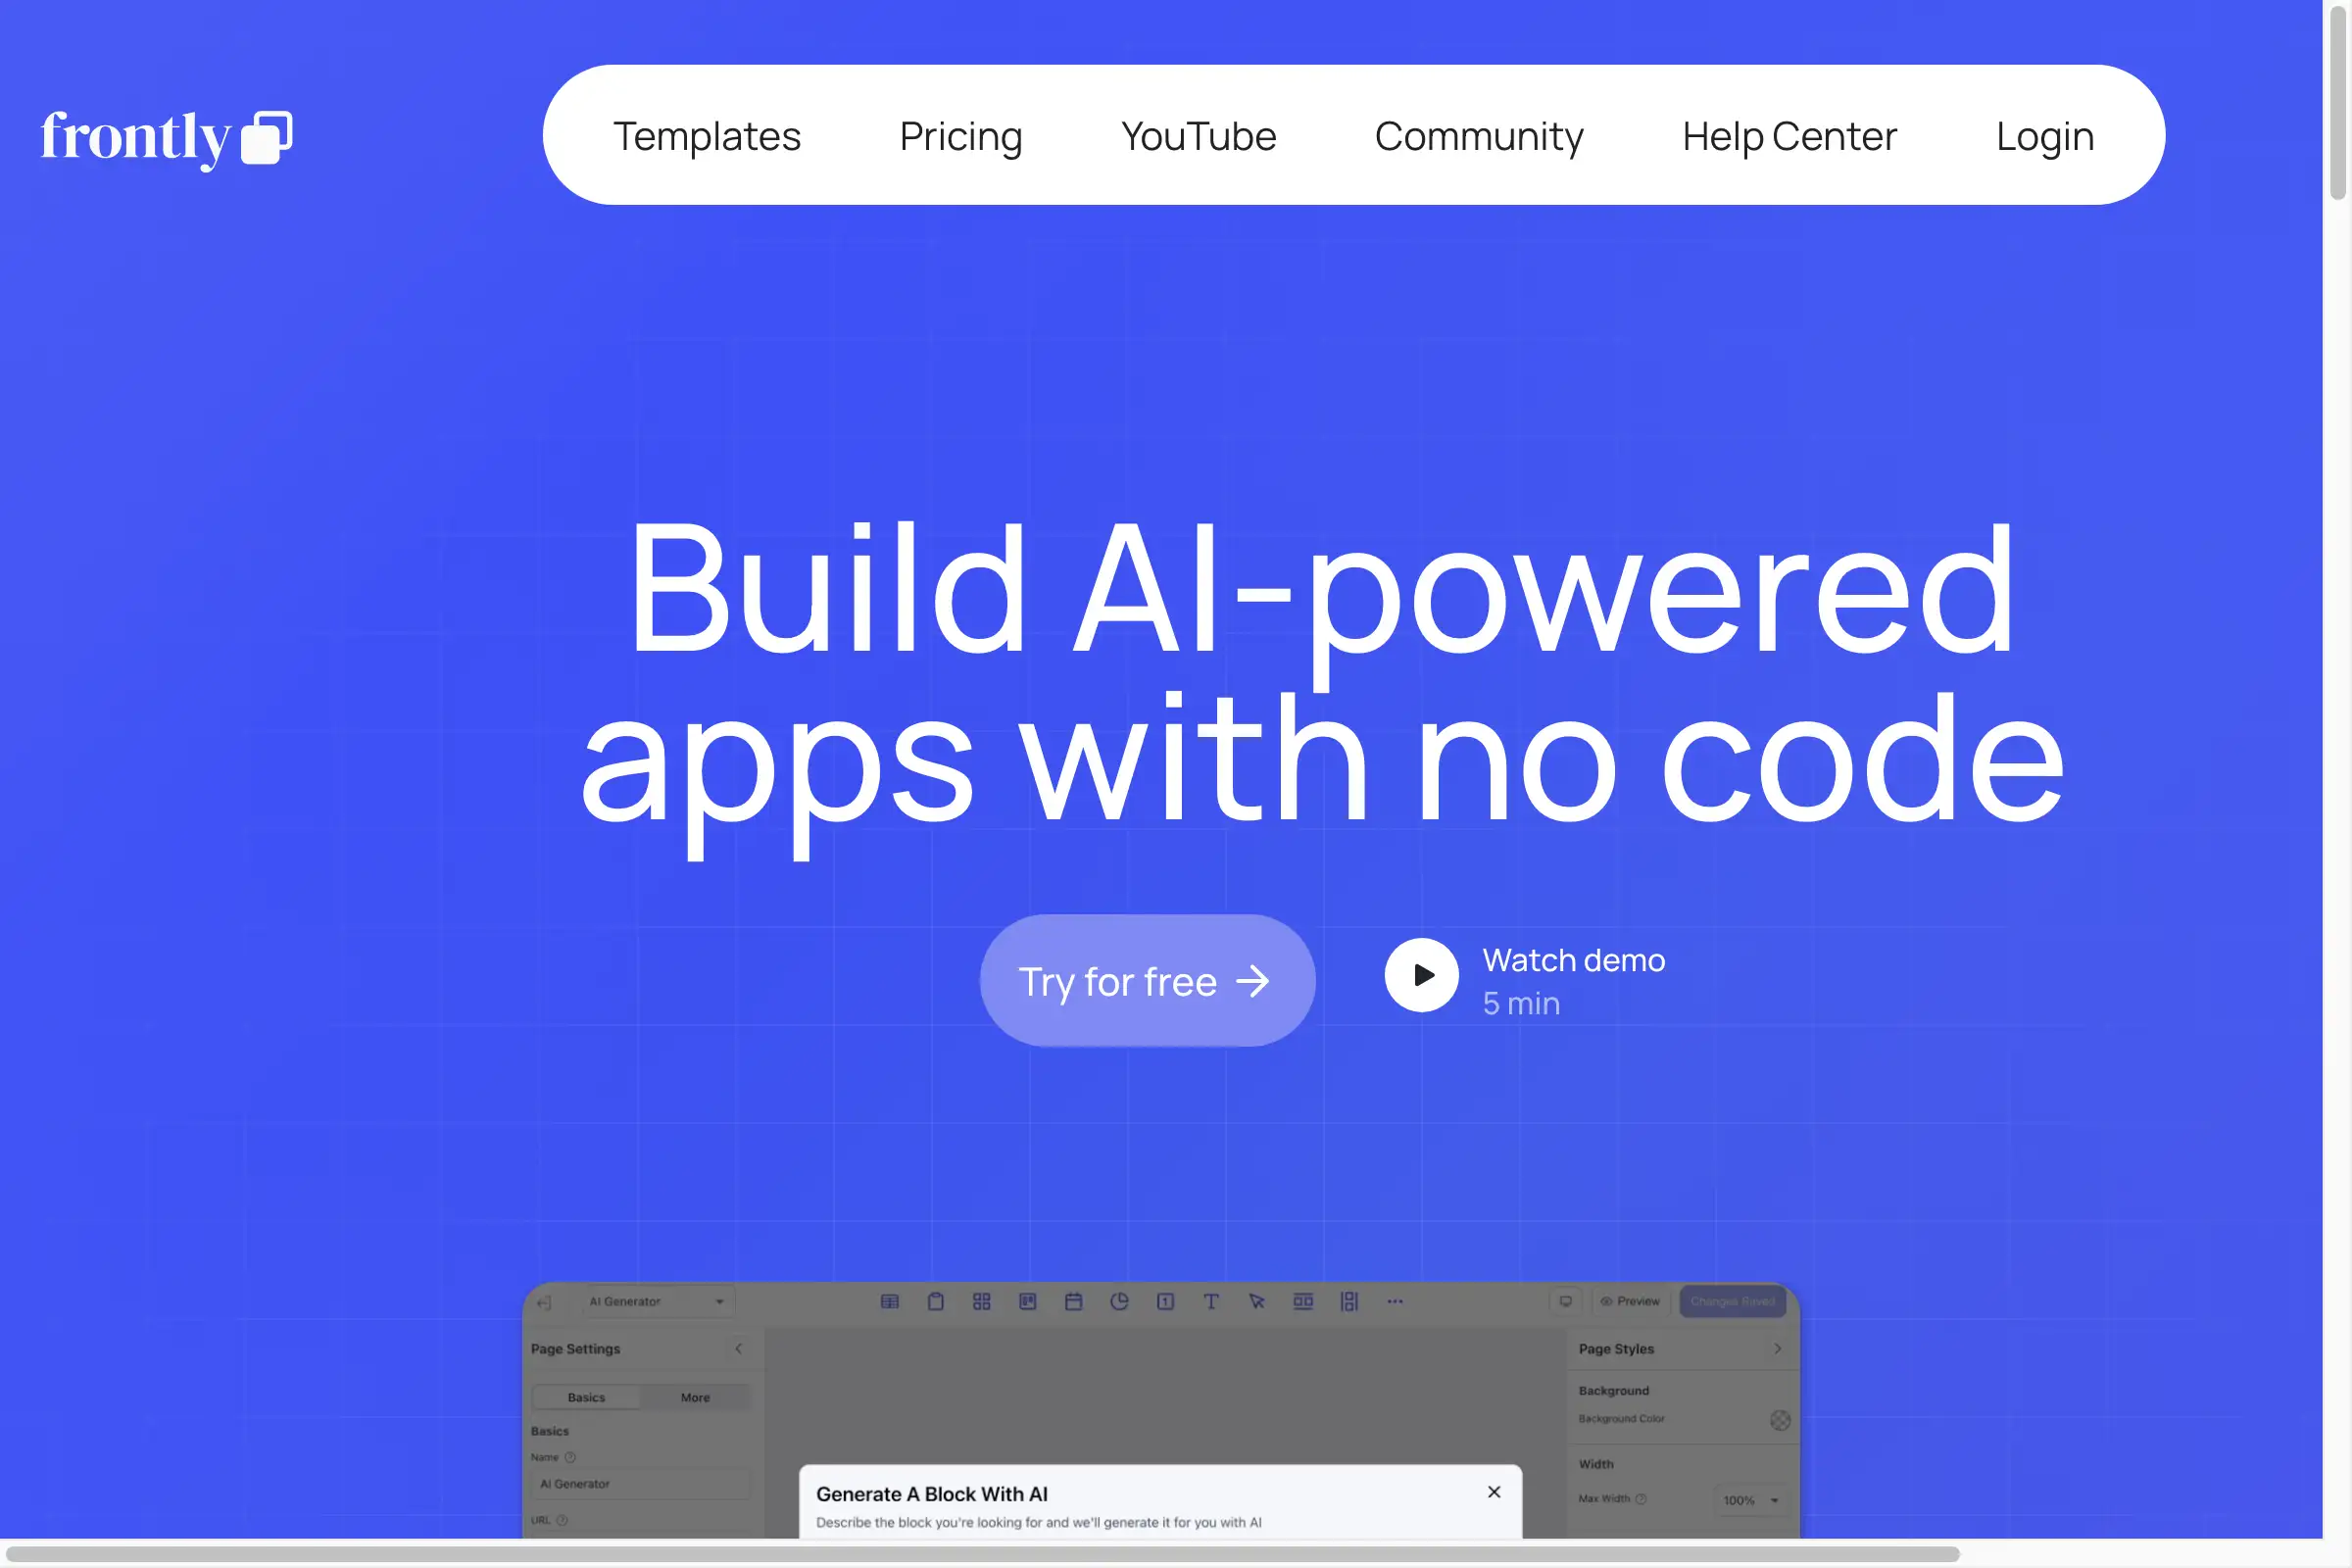 Frontly - Build AI-powered apps with no code